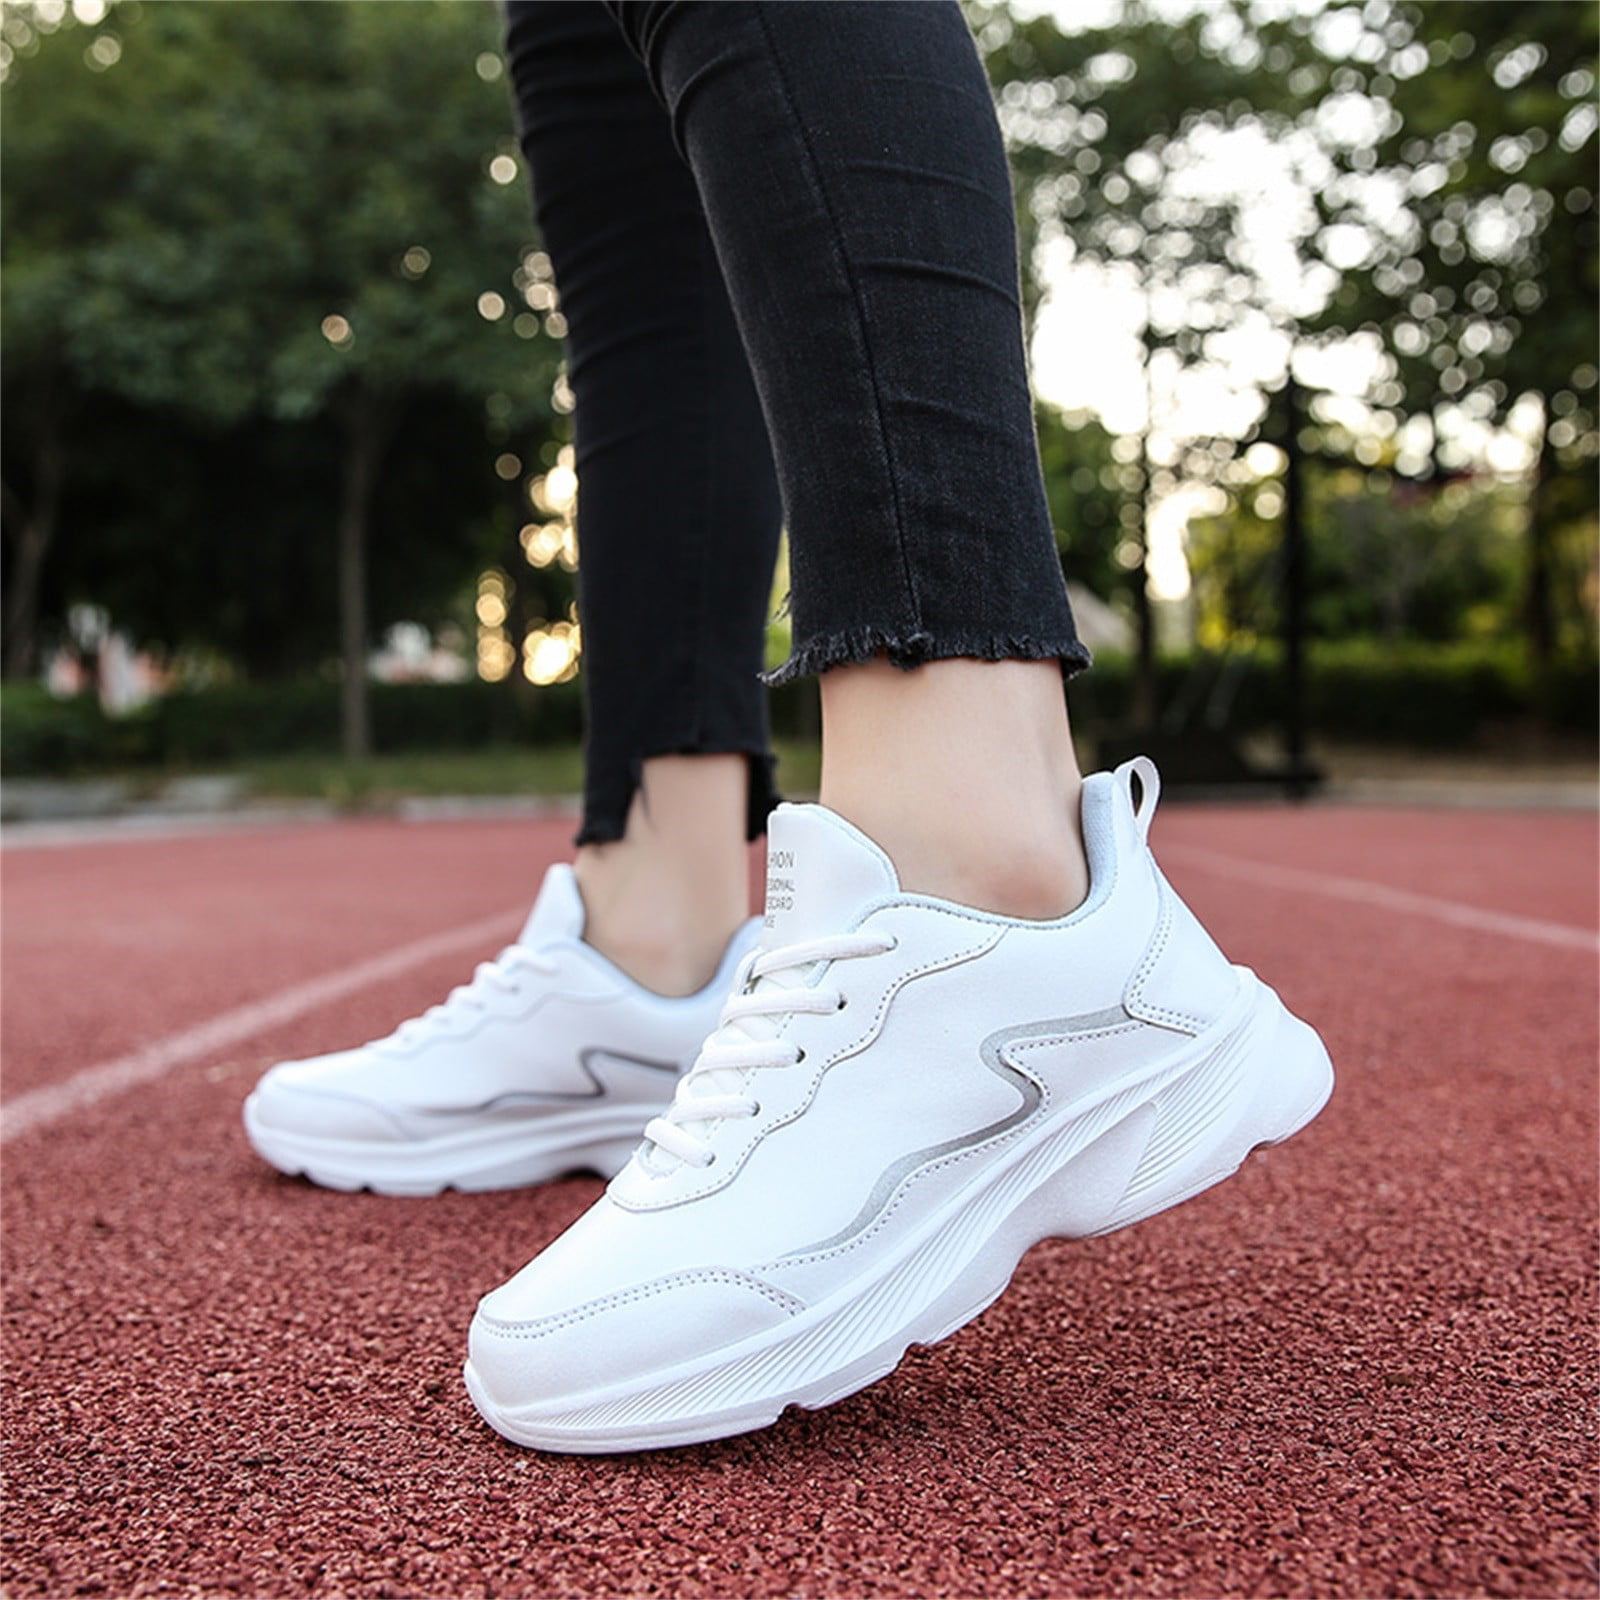 Women's High Top Wedge Heel Sneakers Ladies Lace Up Sport Shoes Canvas  Pumps New | Clothing, Shoes & Accesso… | Sneakers fashion, Wedge heel  sneakers, Sneaker heels